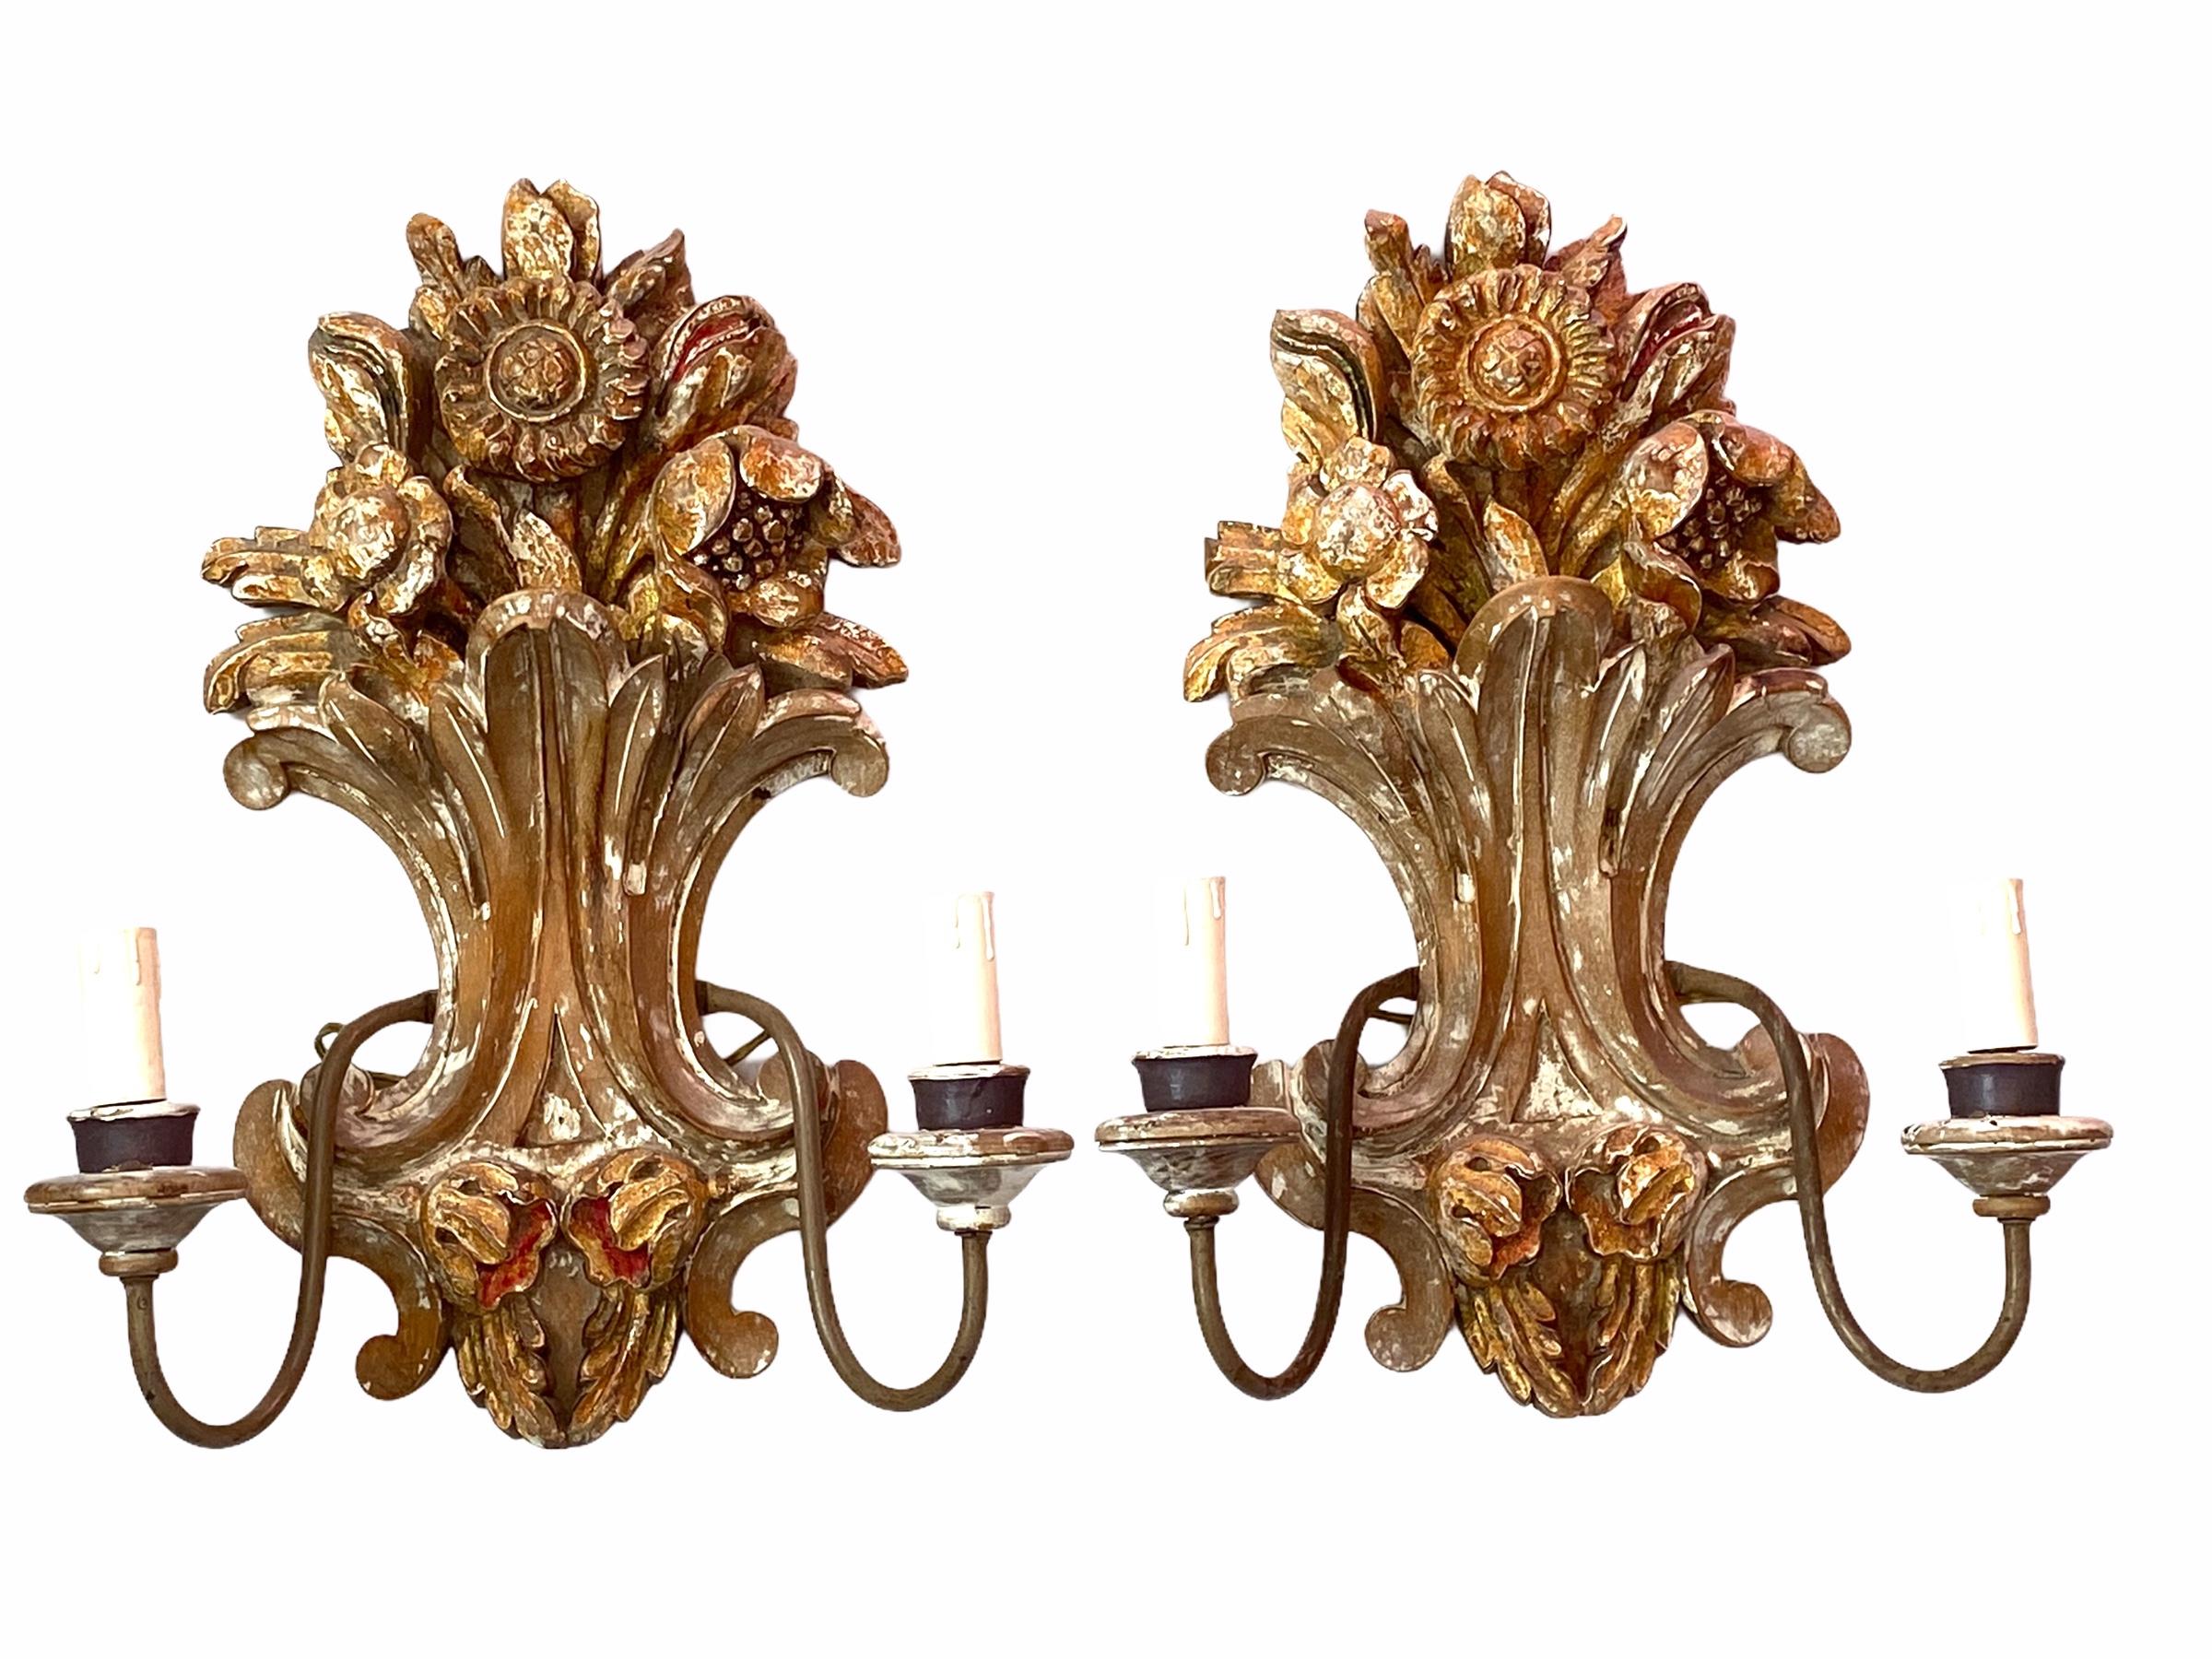 Pair of Wooden Carved Tole Toleware Sconces Chippywhite Gilt Flowers, Italy For Sale 4